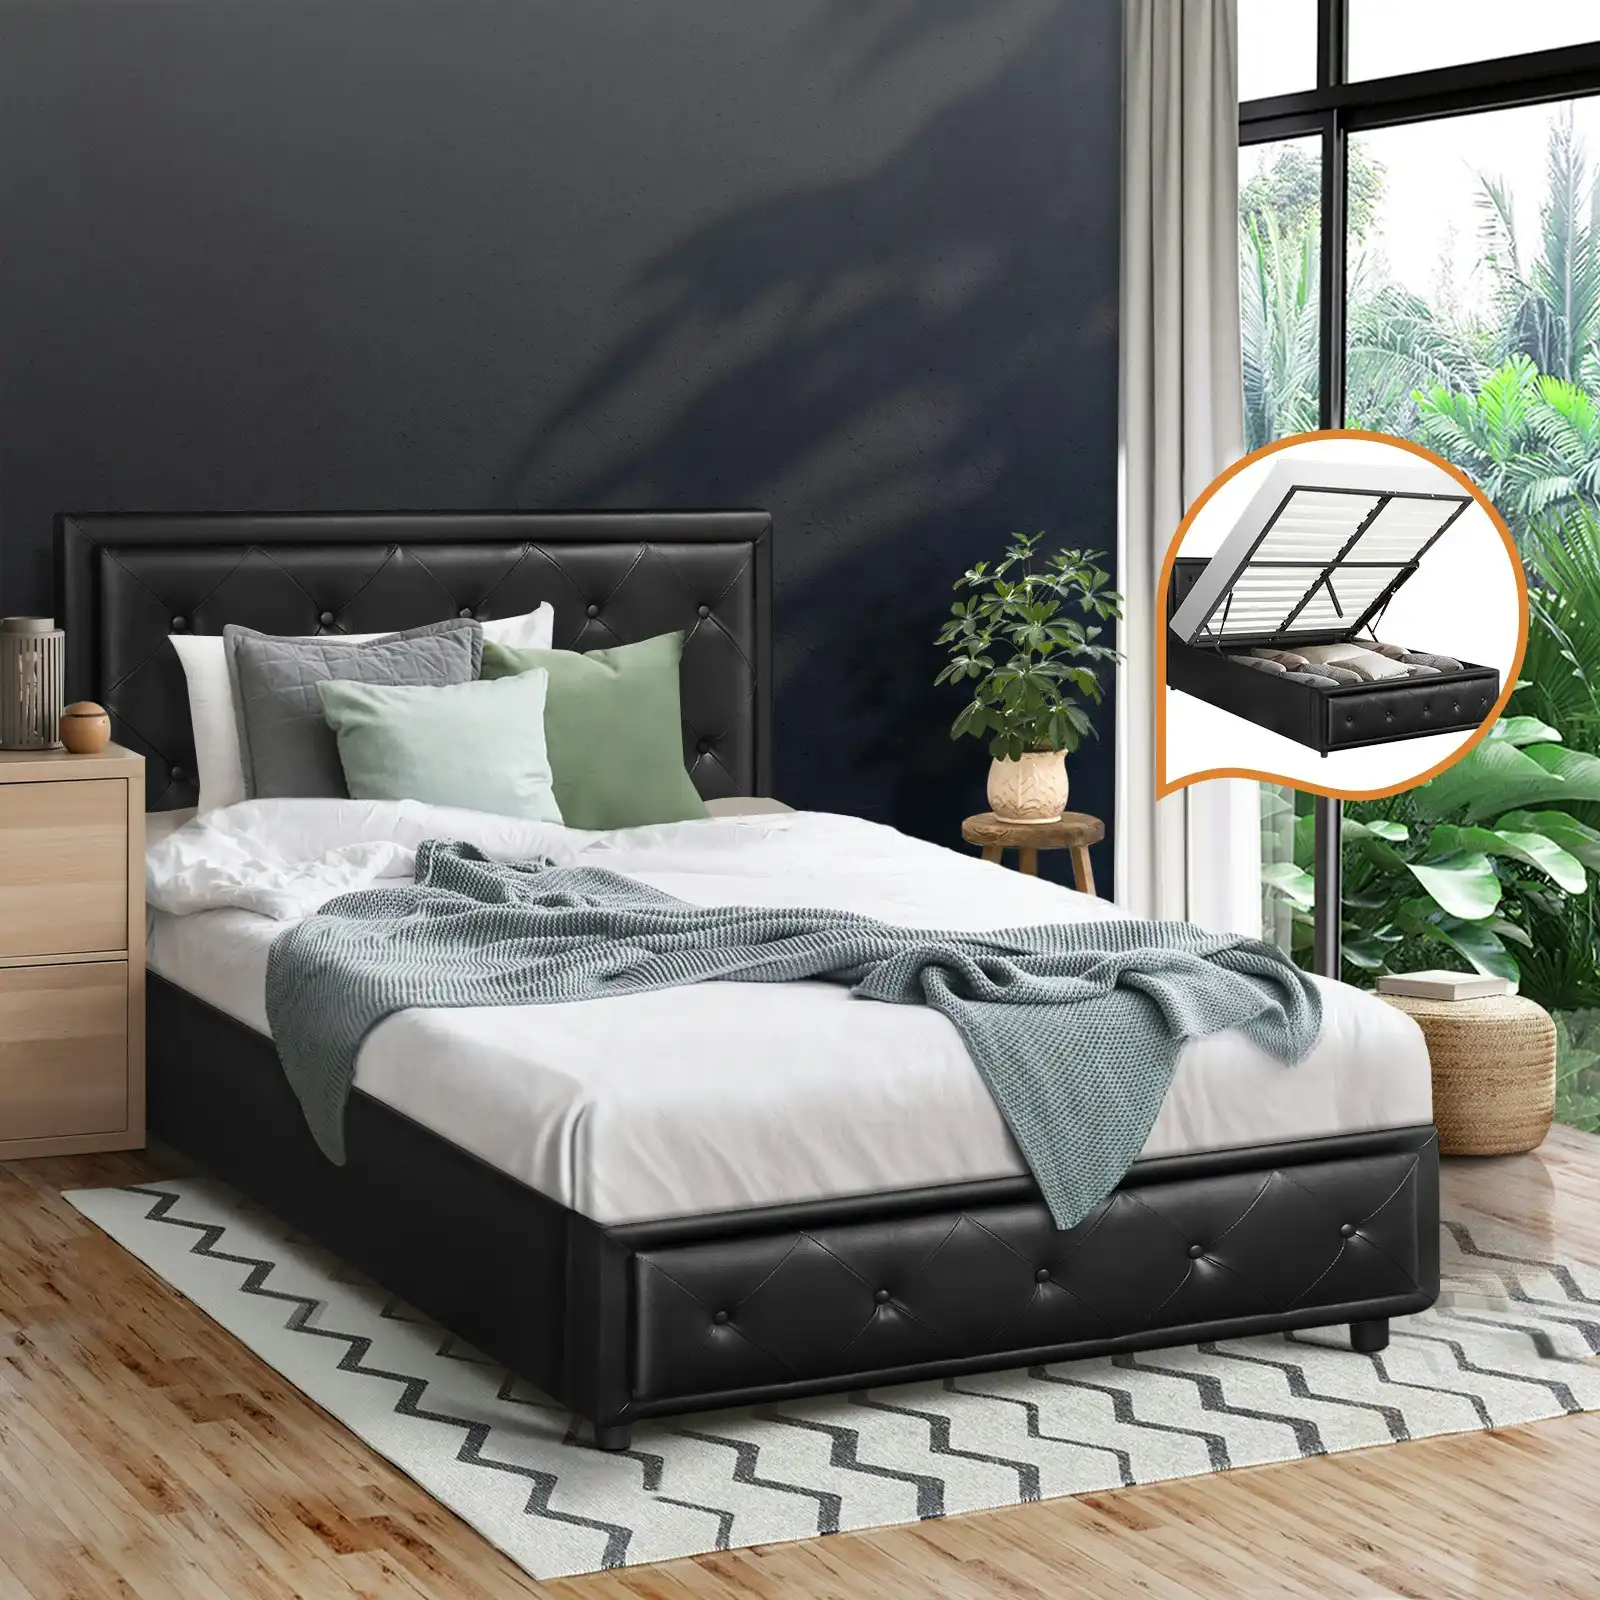 Oikiture Bed Frame King Single Size Gas Lift Base With Storage Black Leather